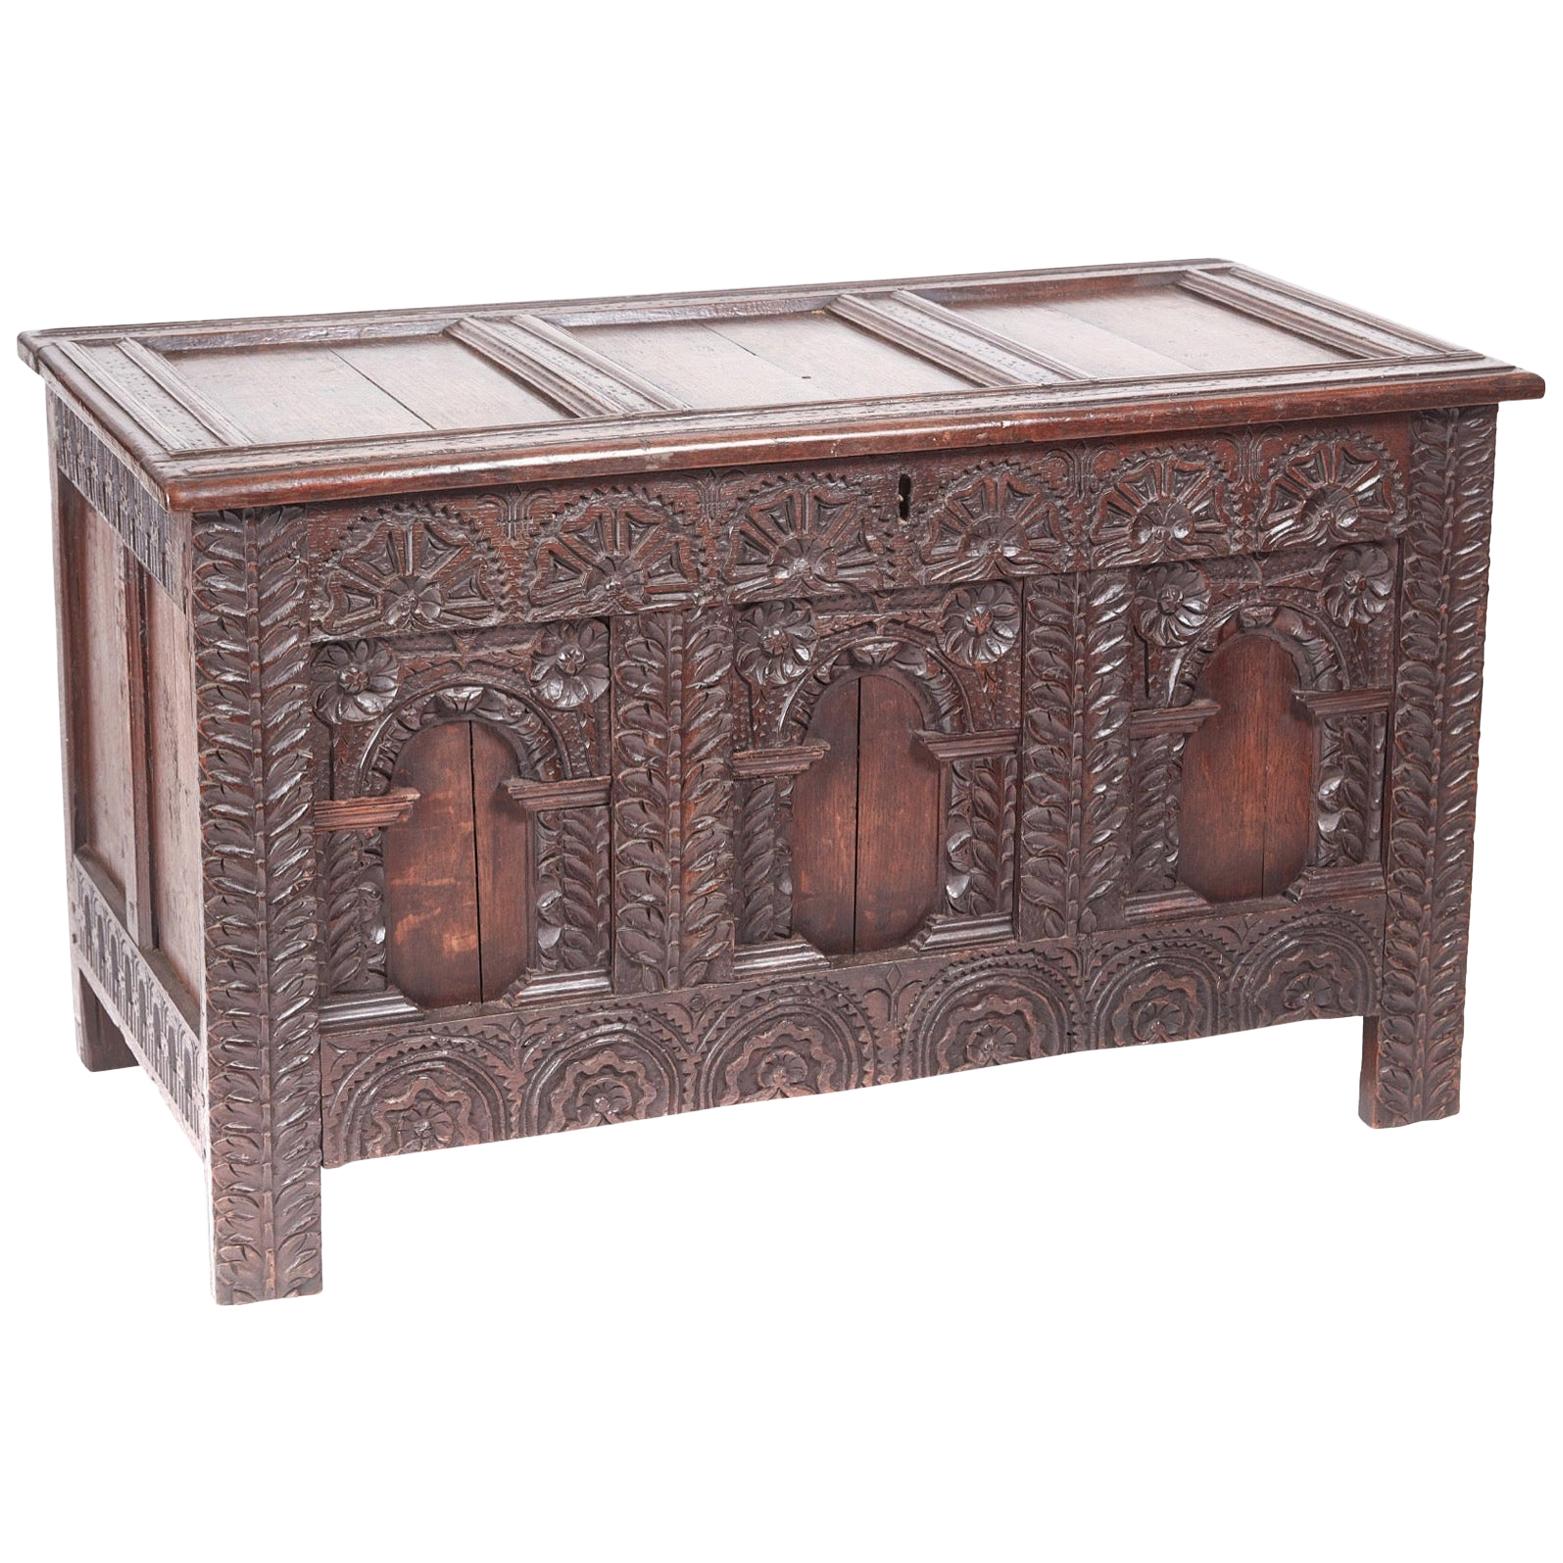 18th Century Antique Carved Oak Paneled Coffer